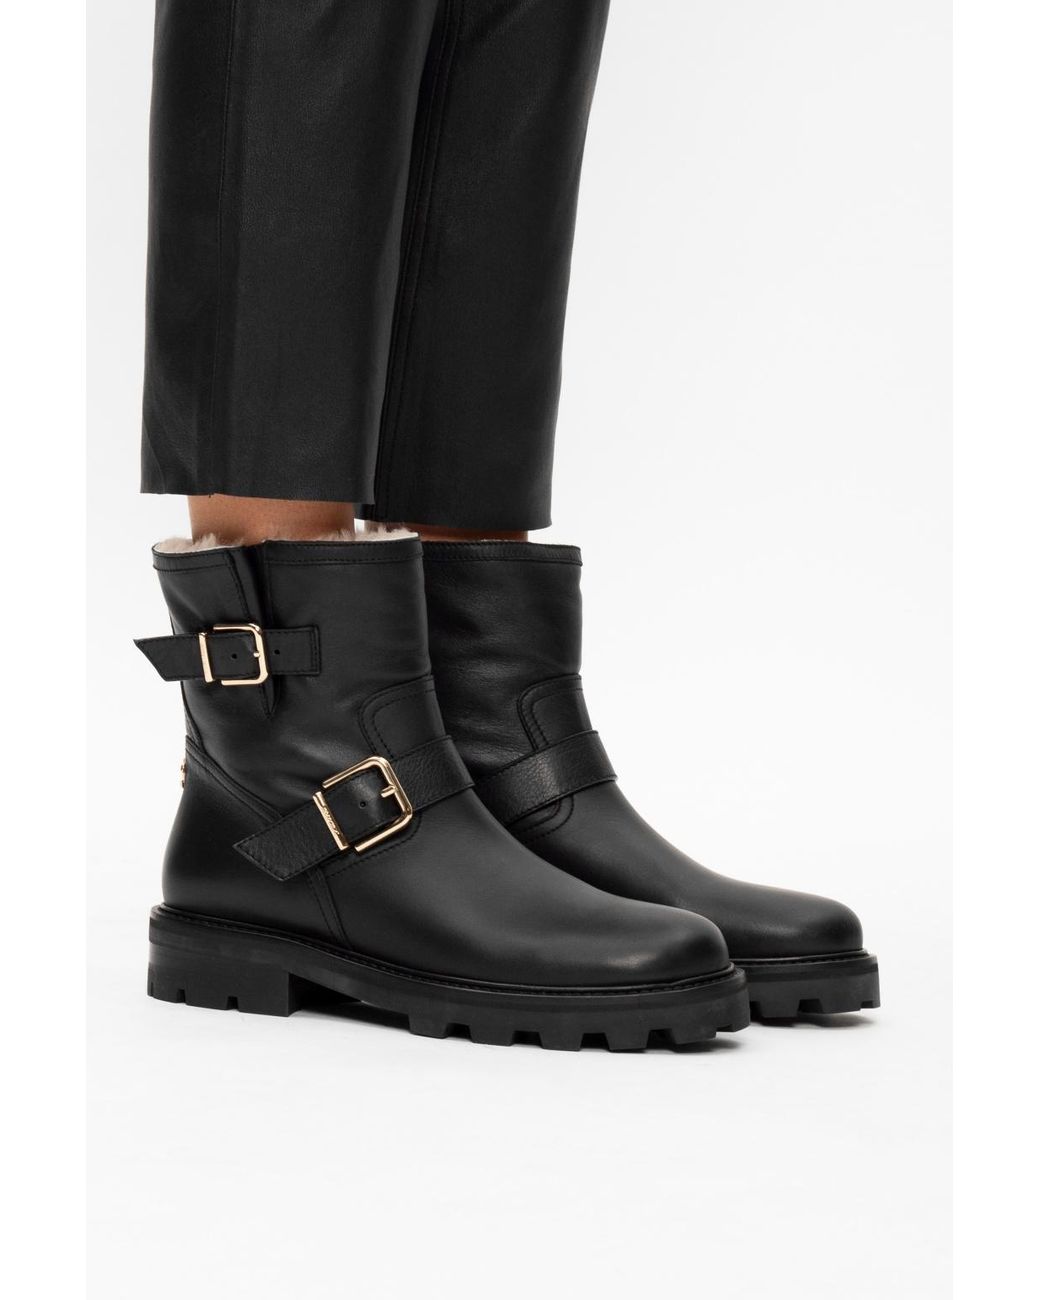 Jimmy Choo 'youth Ii' Leather Ankle Boots in Black - Lyst